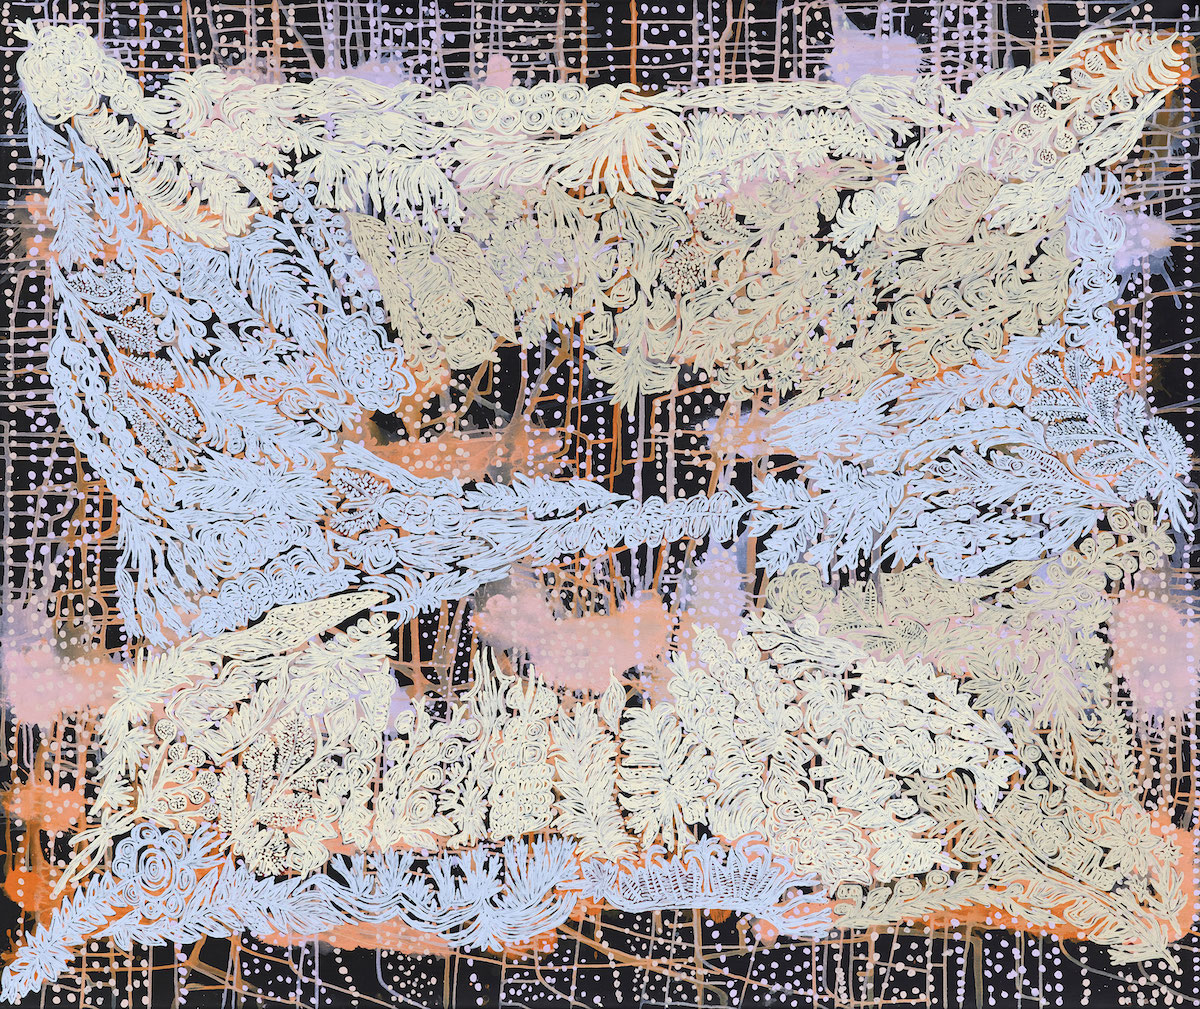 Abstract painting of layered drips, dots and botanical designs in black, orange, blue, yellow and pink.